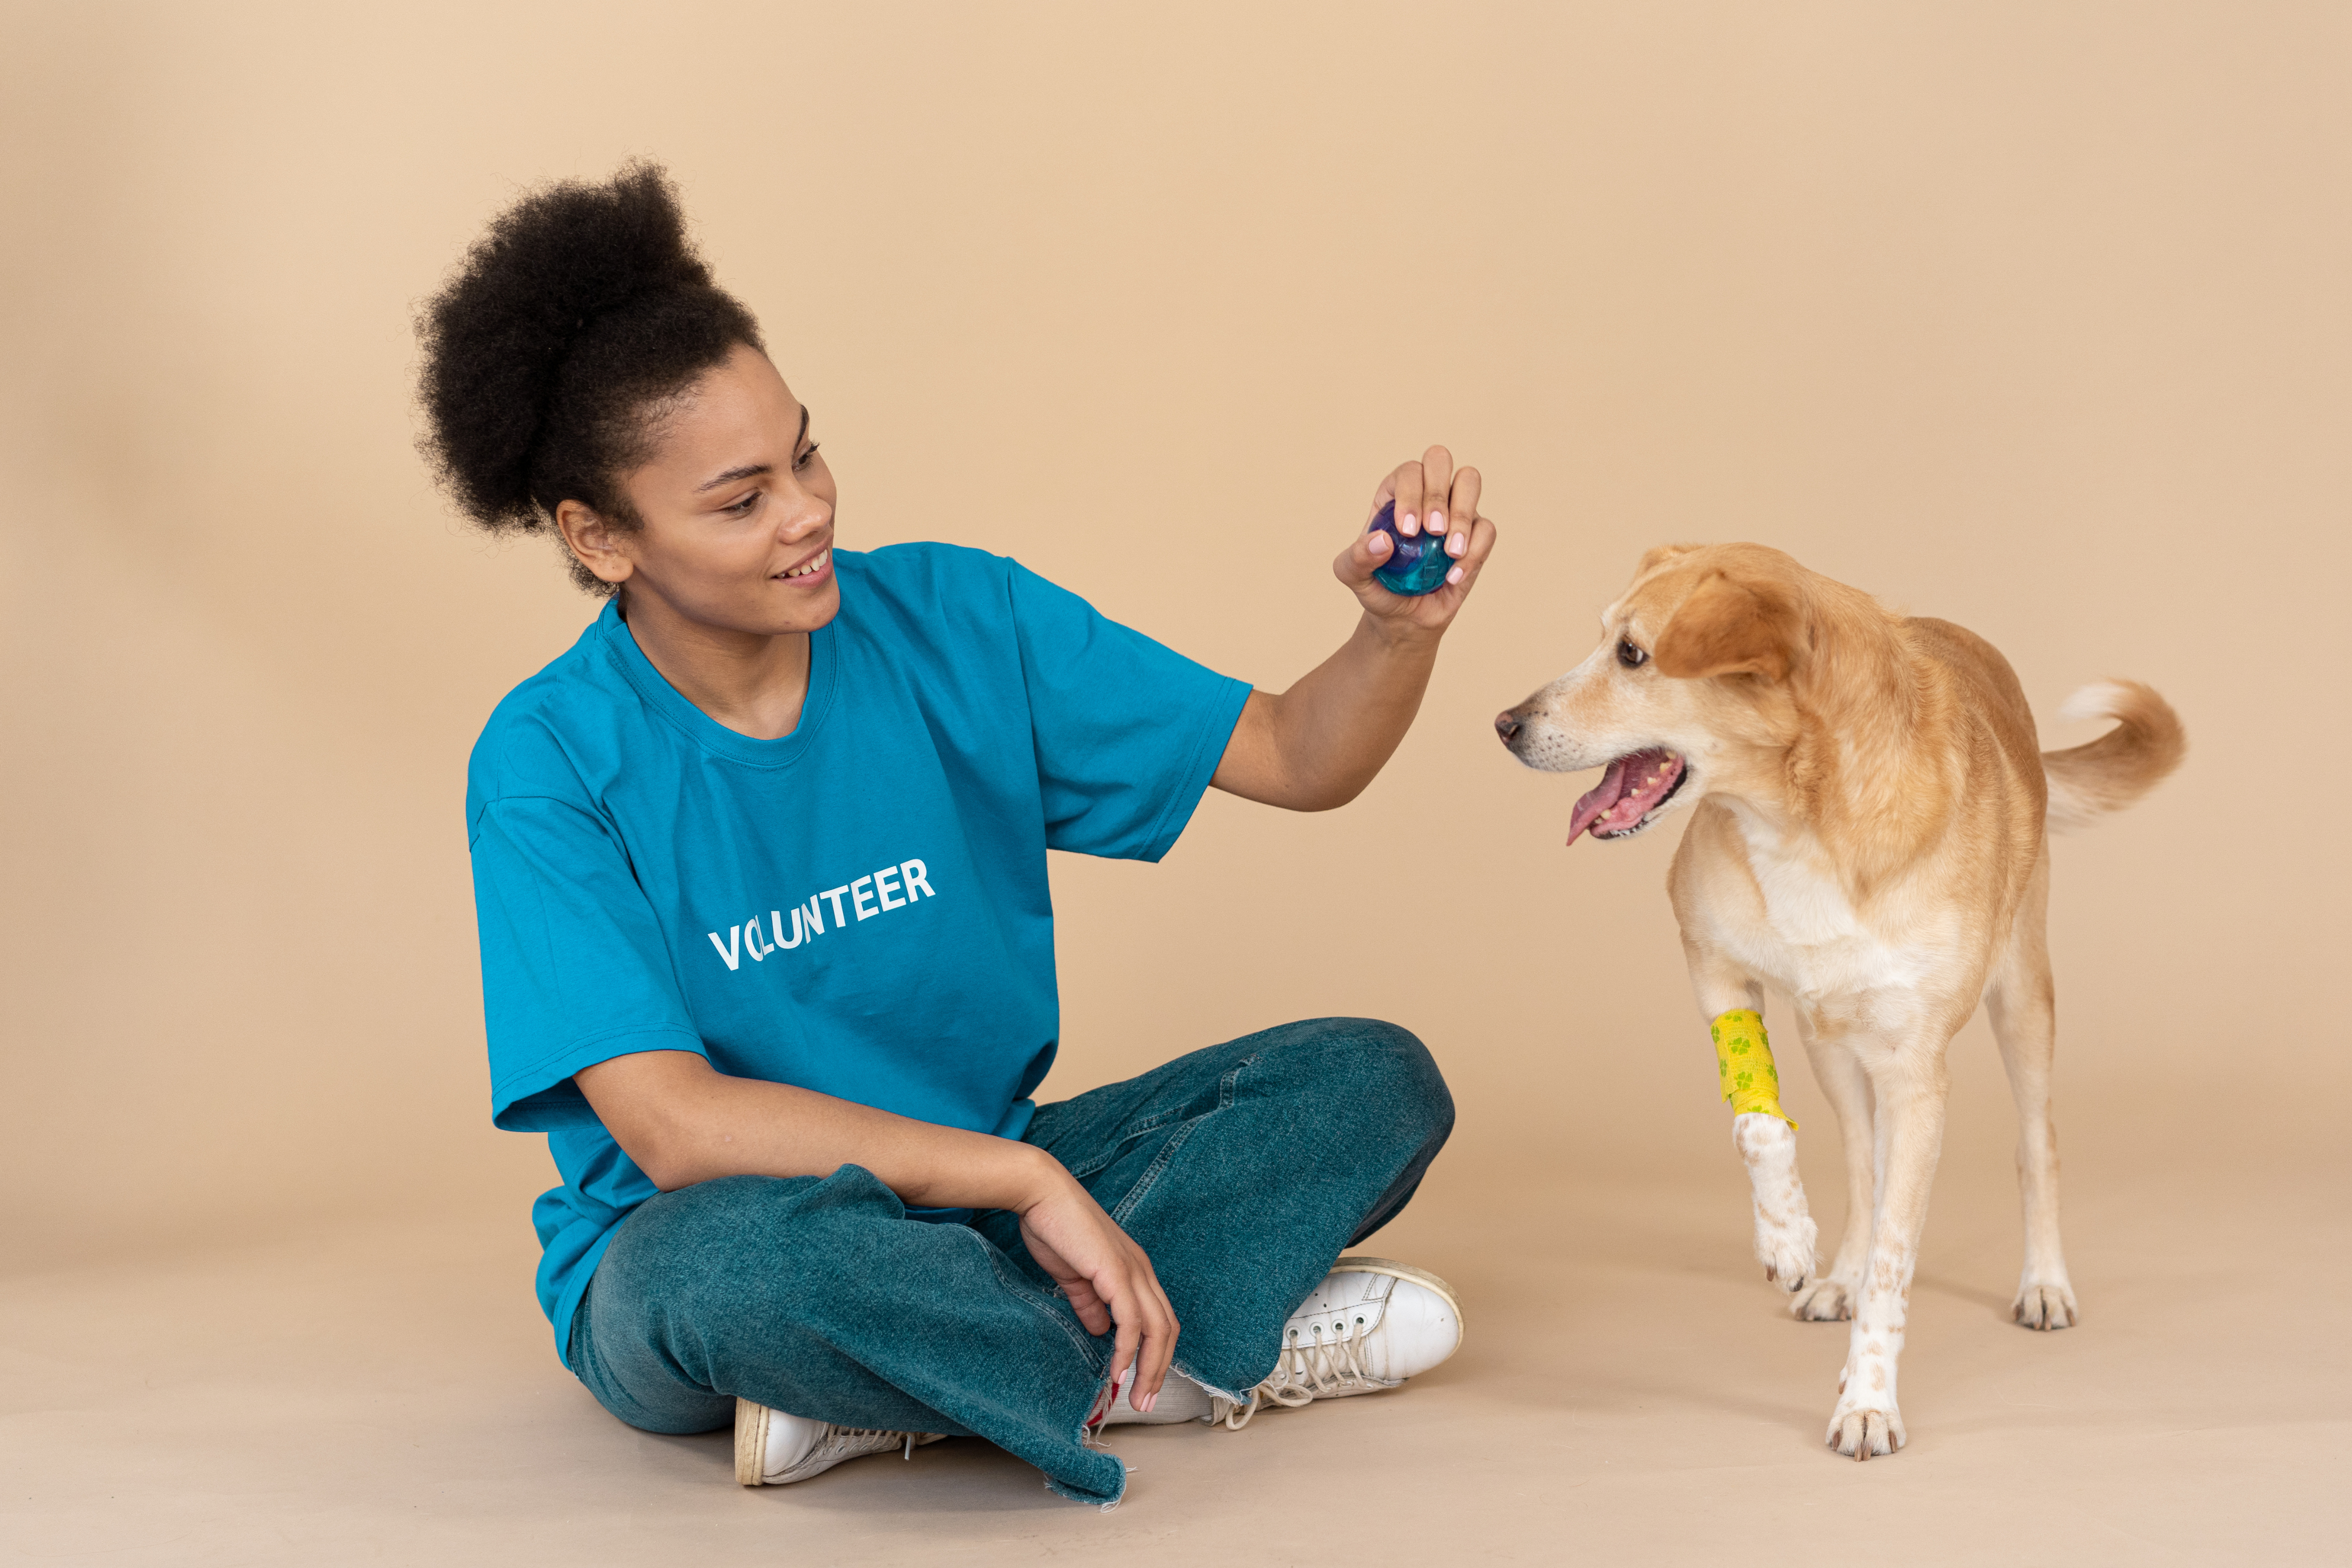 ERP Systems can assist in streamlining operations, reducing costs, and enhance productivity. The woman in the image has additional time to play ball with the rescue dog due to time eliminated when manual tasks became automated.